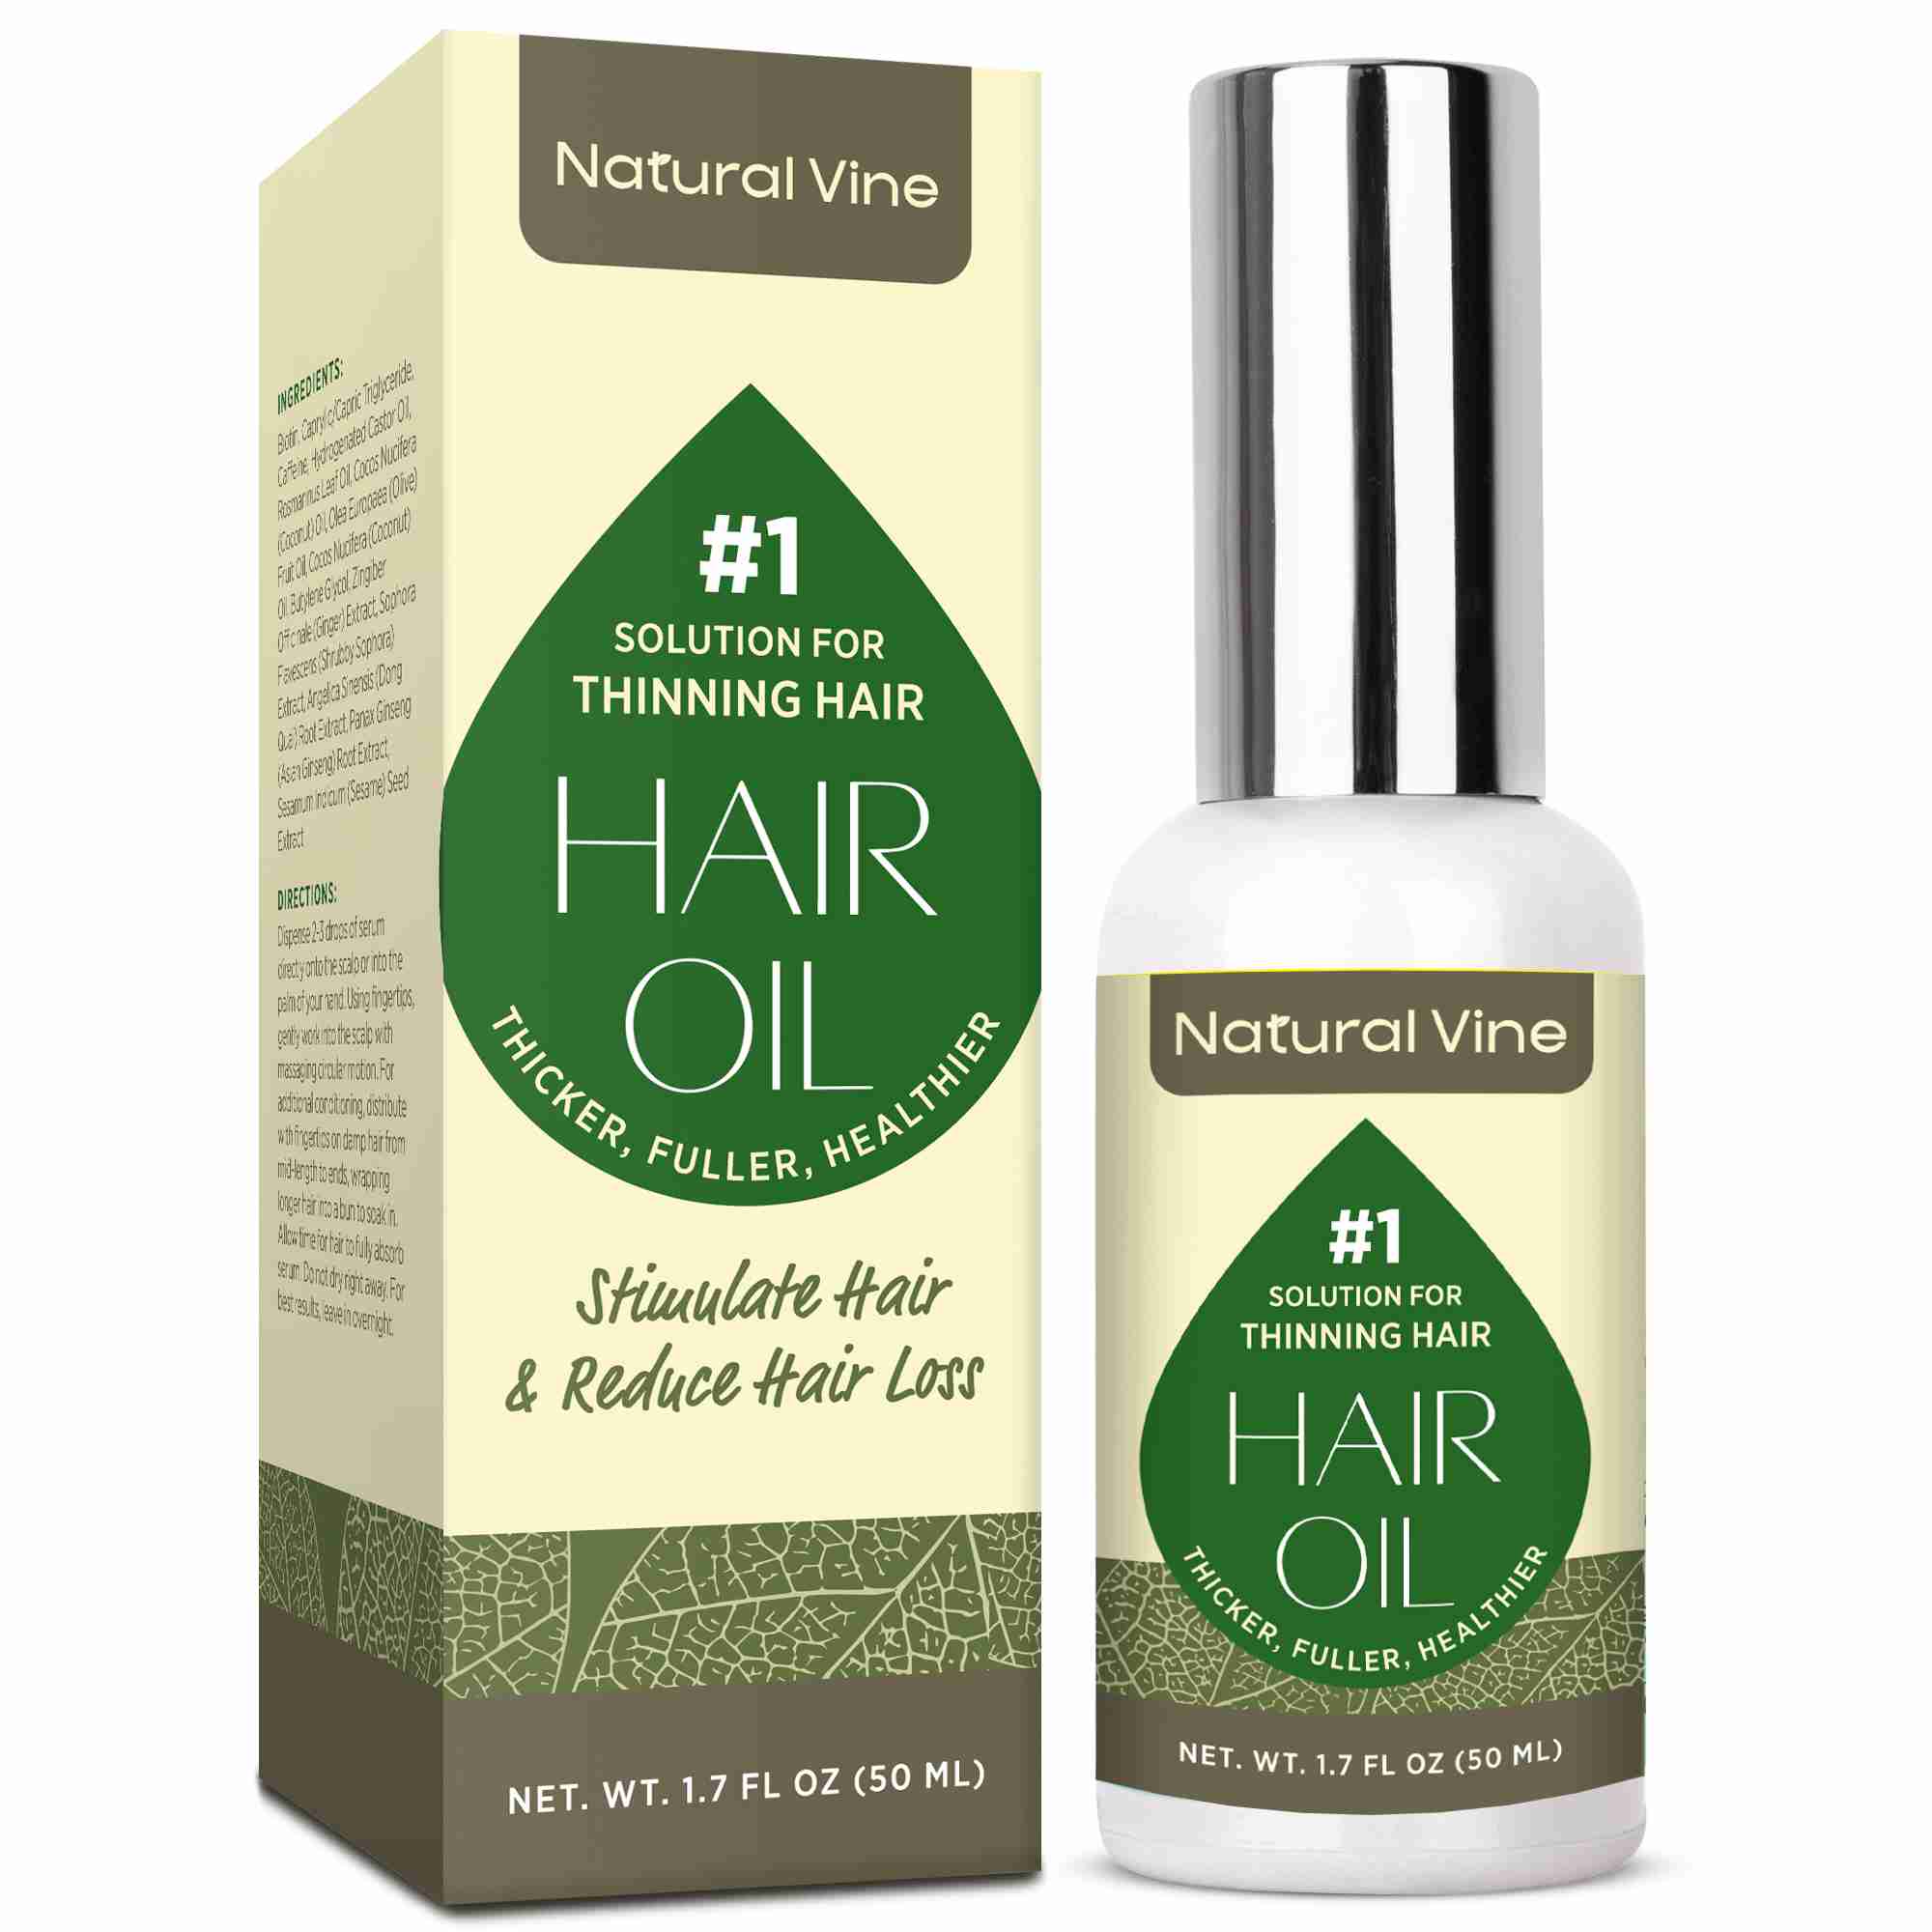 hair-growth-oil with cash back rebate